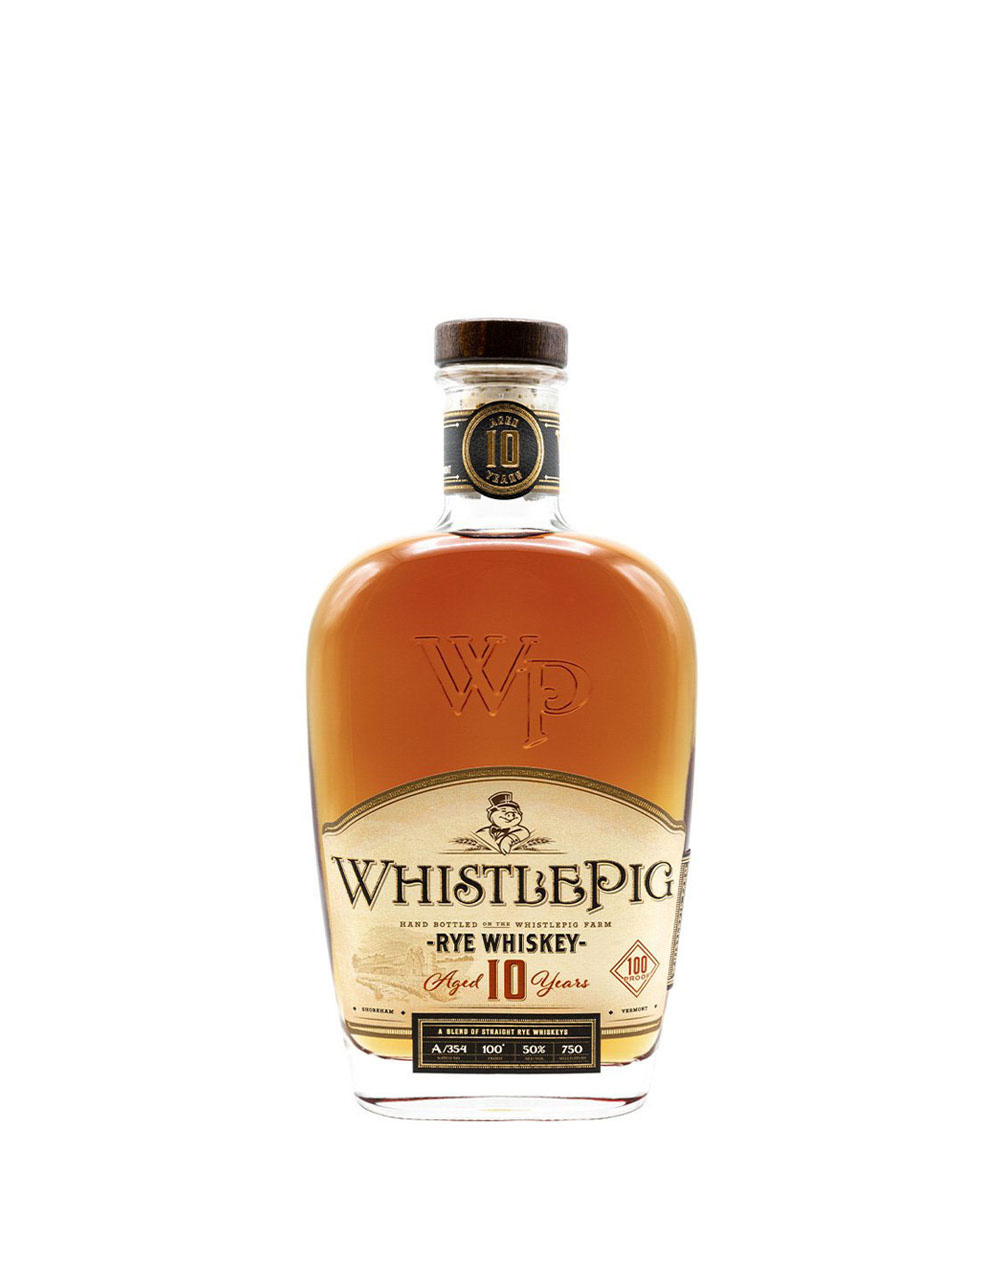 WhistlePig 10 Year 100 Proof Rye Whiskey